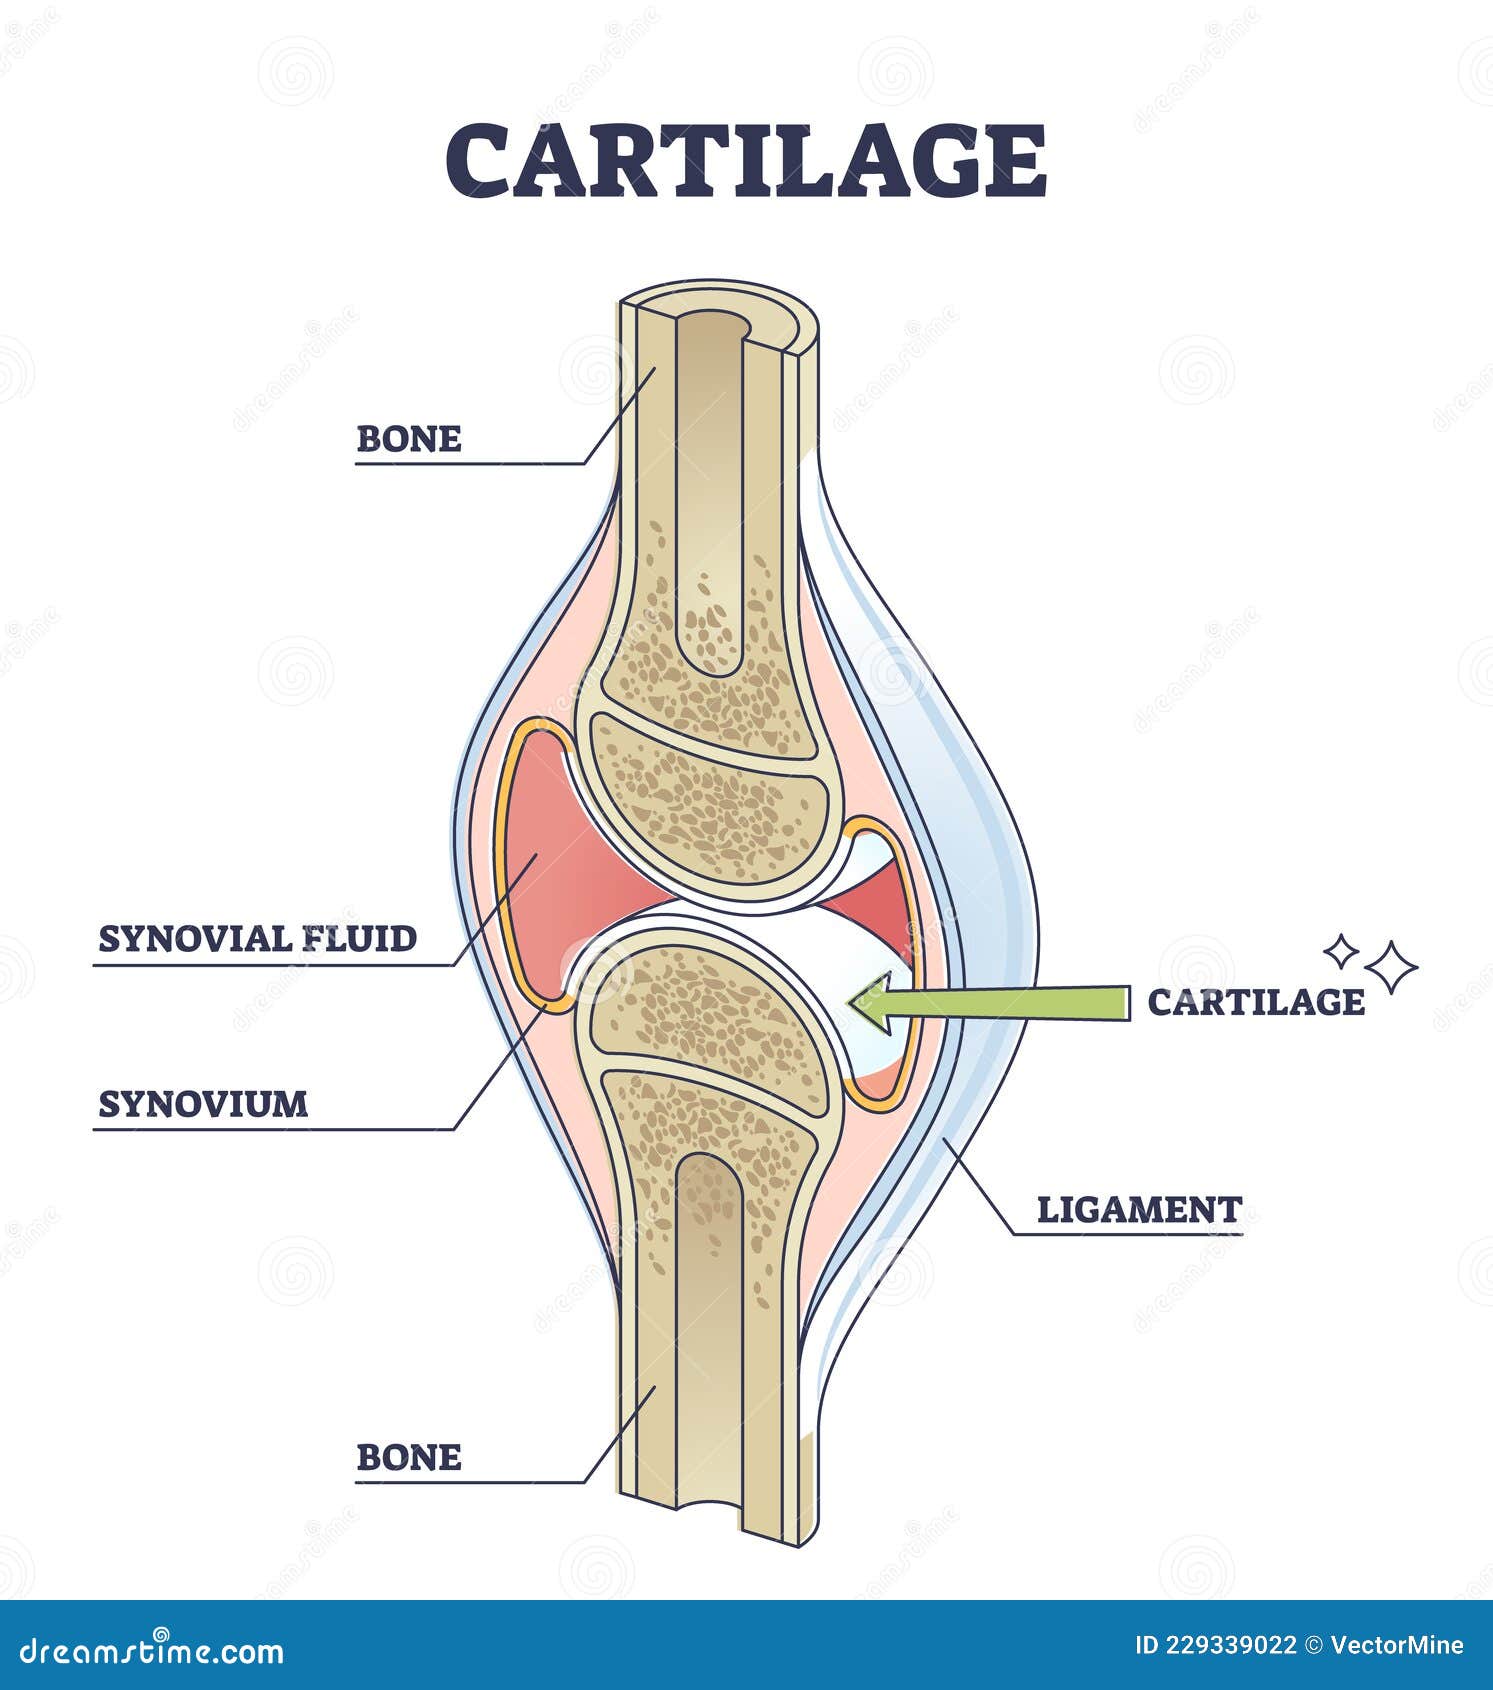 cartilage elastic tissue location in body and leg structure outline diagram